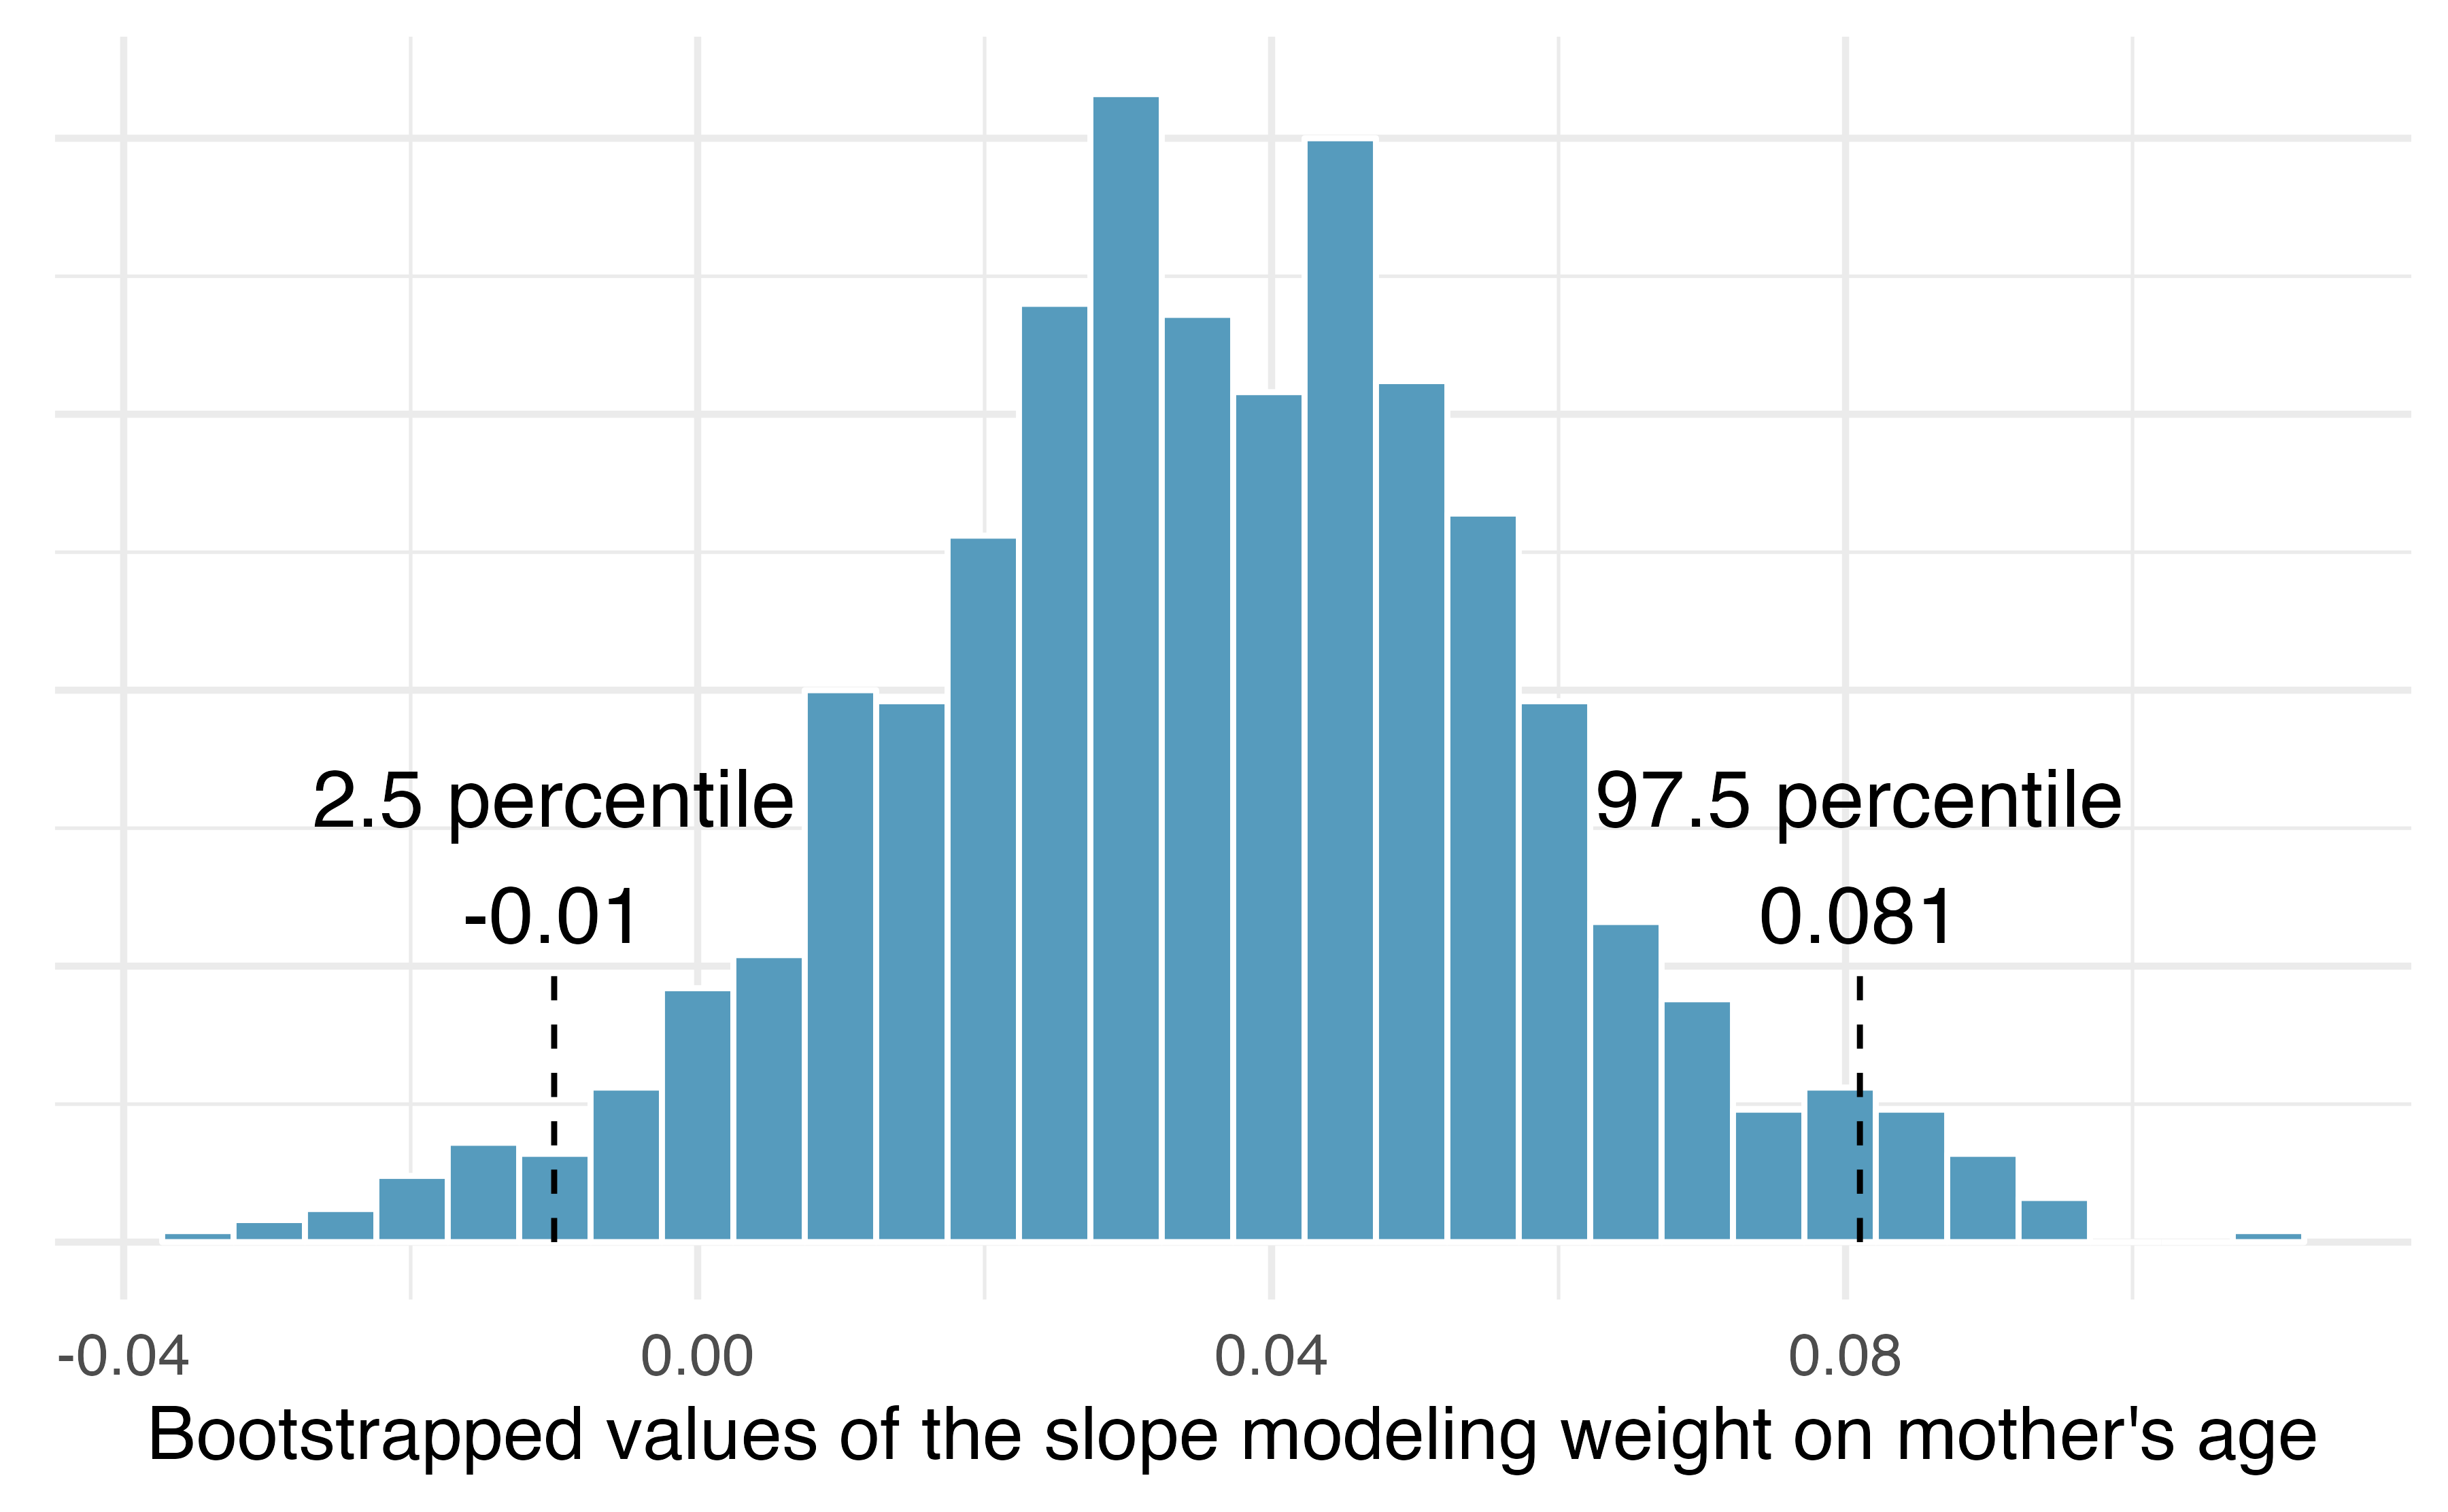 Histogram of the slopes computed from many bootstrapped samples. The bootstrap samples range from -0.05 (with the 2.5 percentile at -0.01) to +0.1 (with the 97.5 percentile at 0.081). The bootstrapped slopes form a histogram that is reasonably symmetric and bell-shaped.